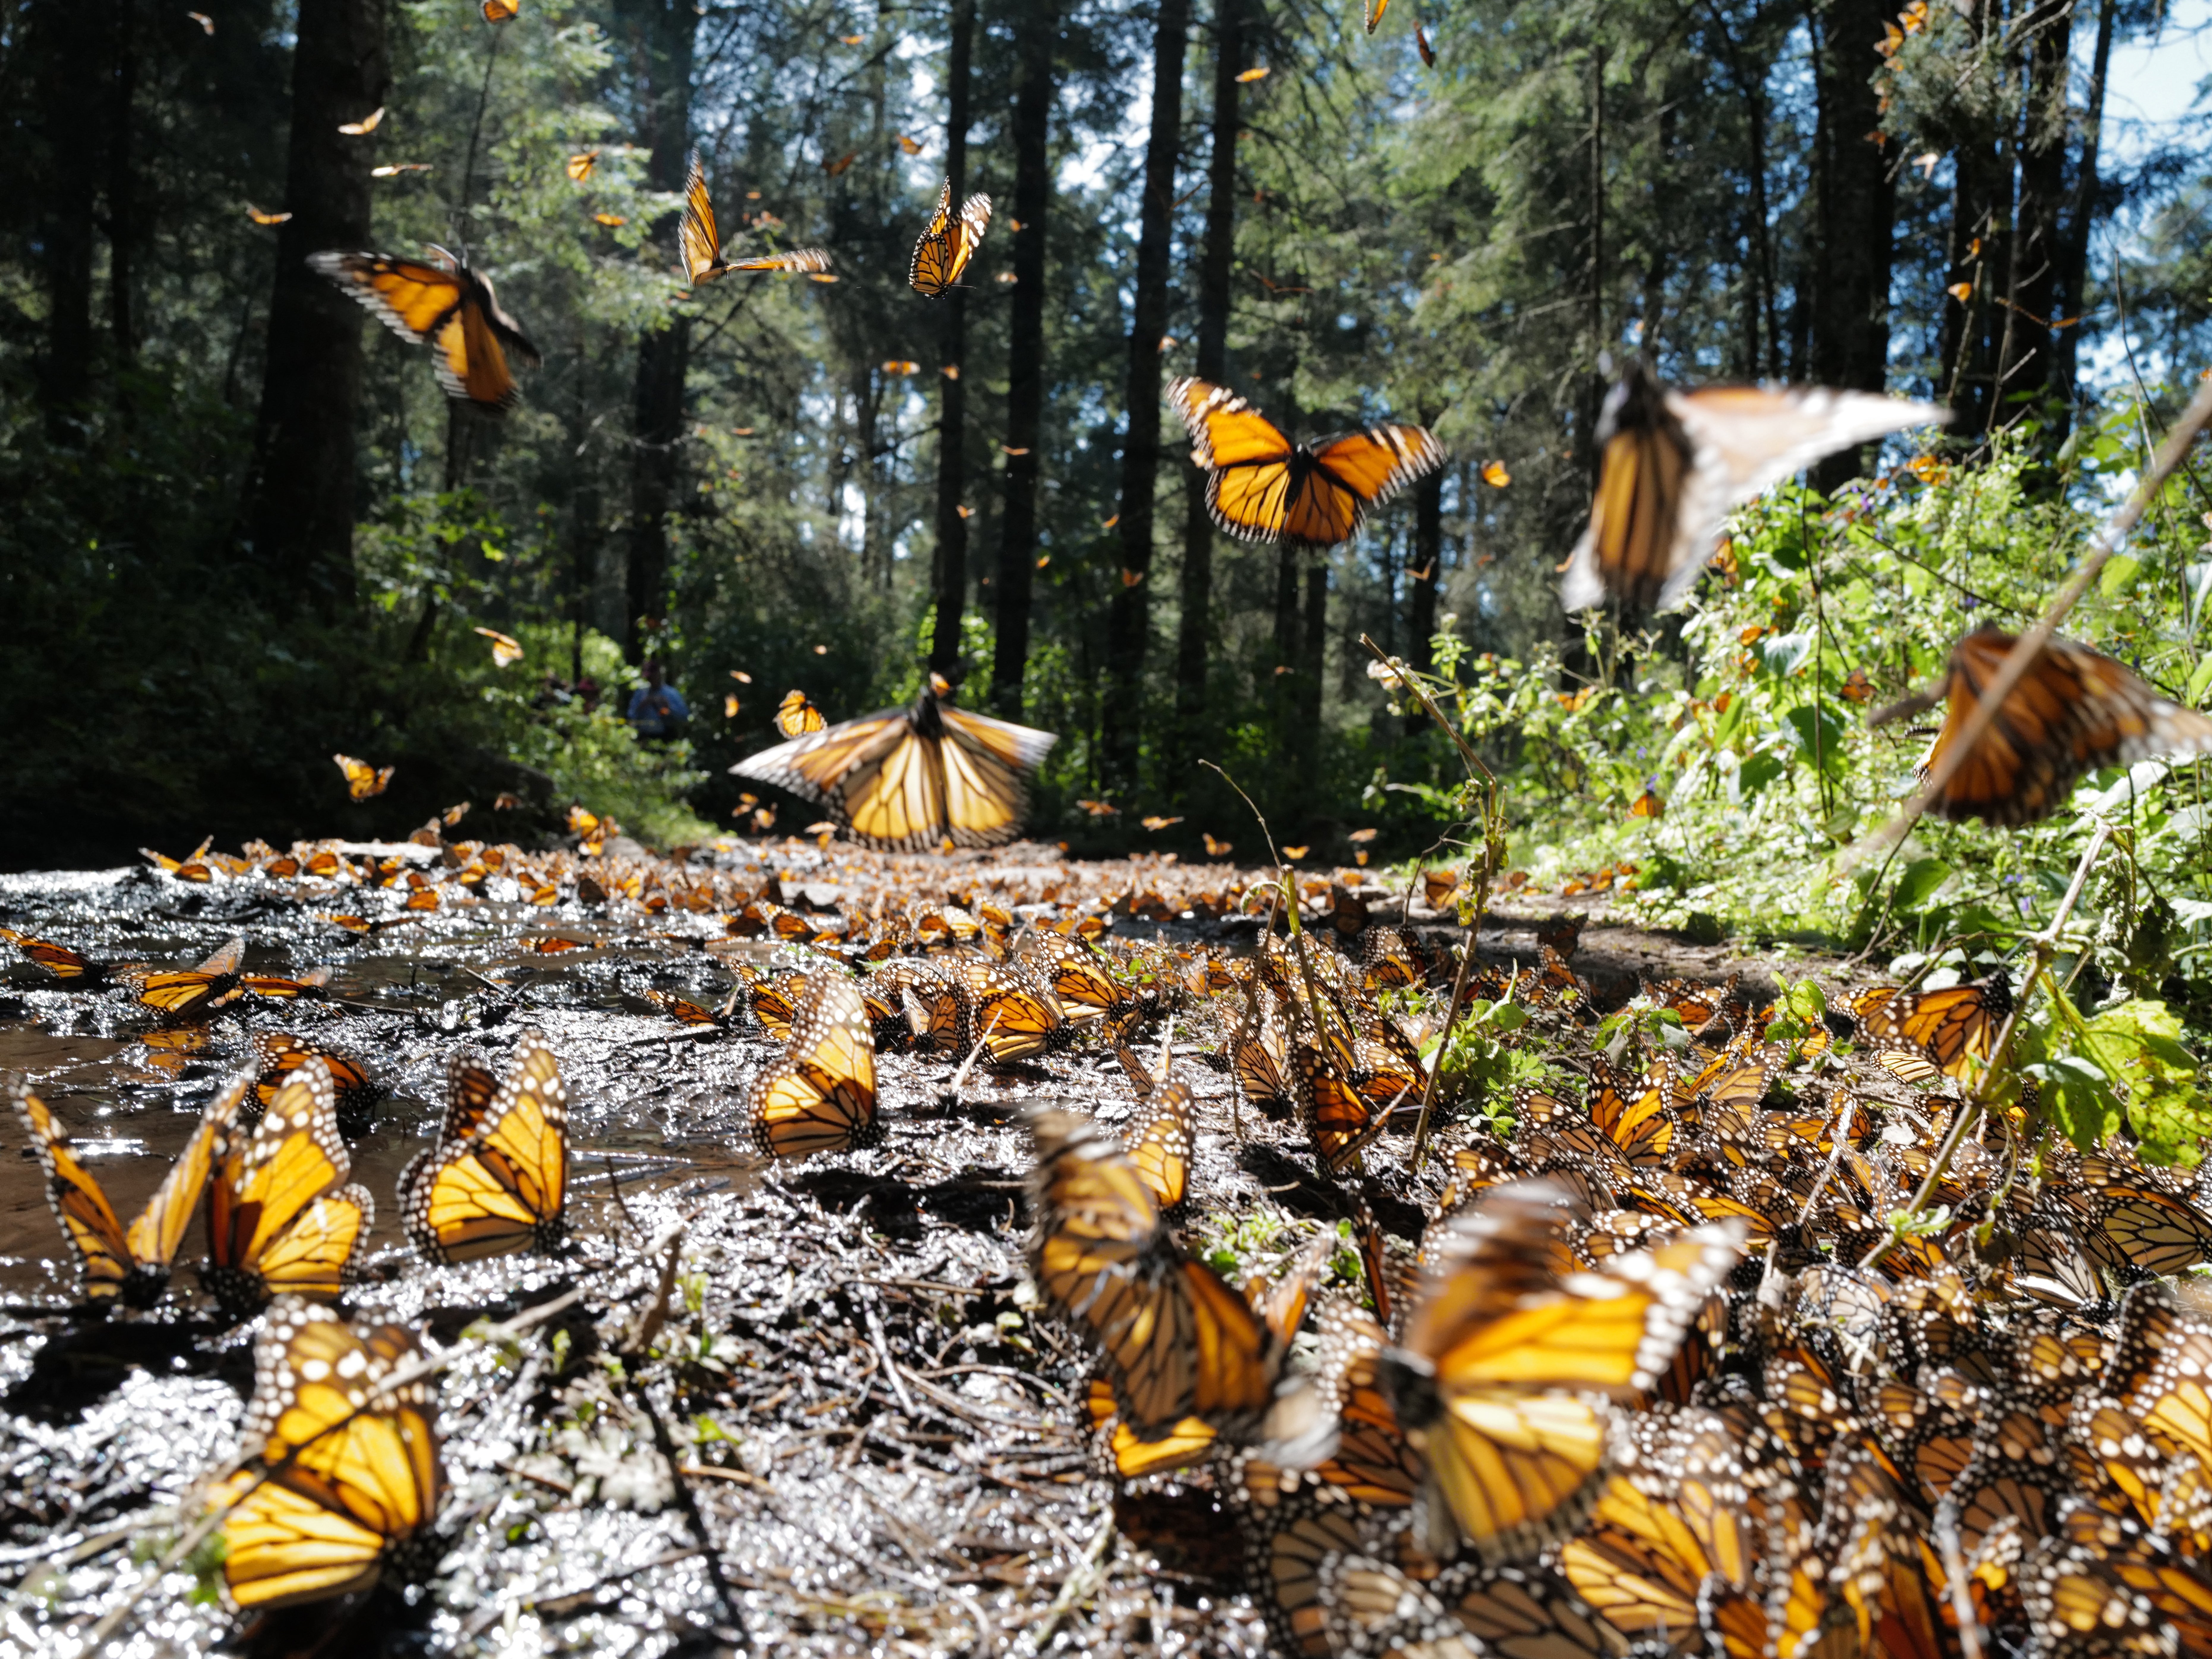 Every year, millions of monarch butterflies migrate to the same remote stretch of forest in central Mexico